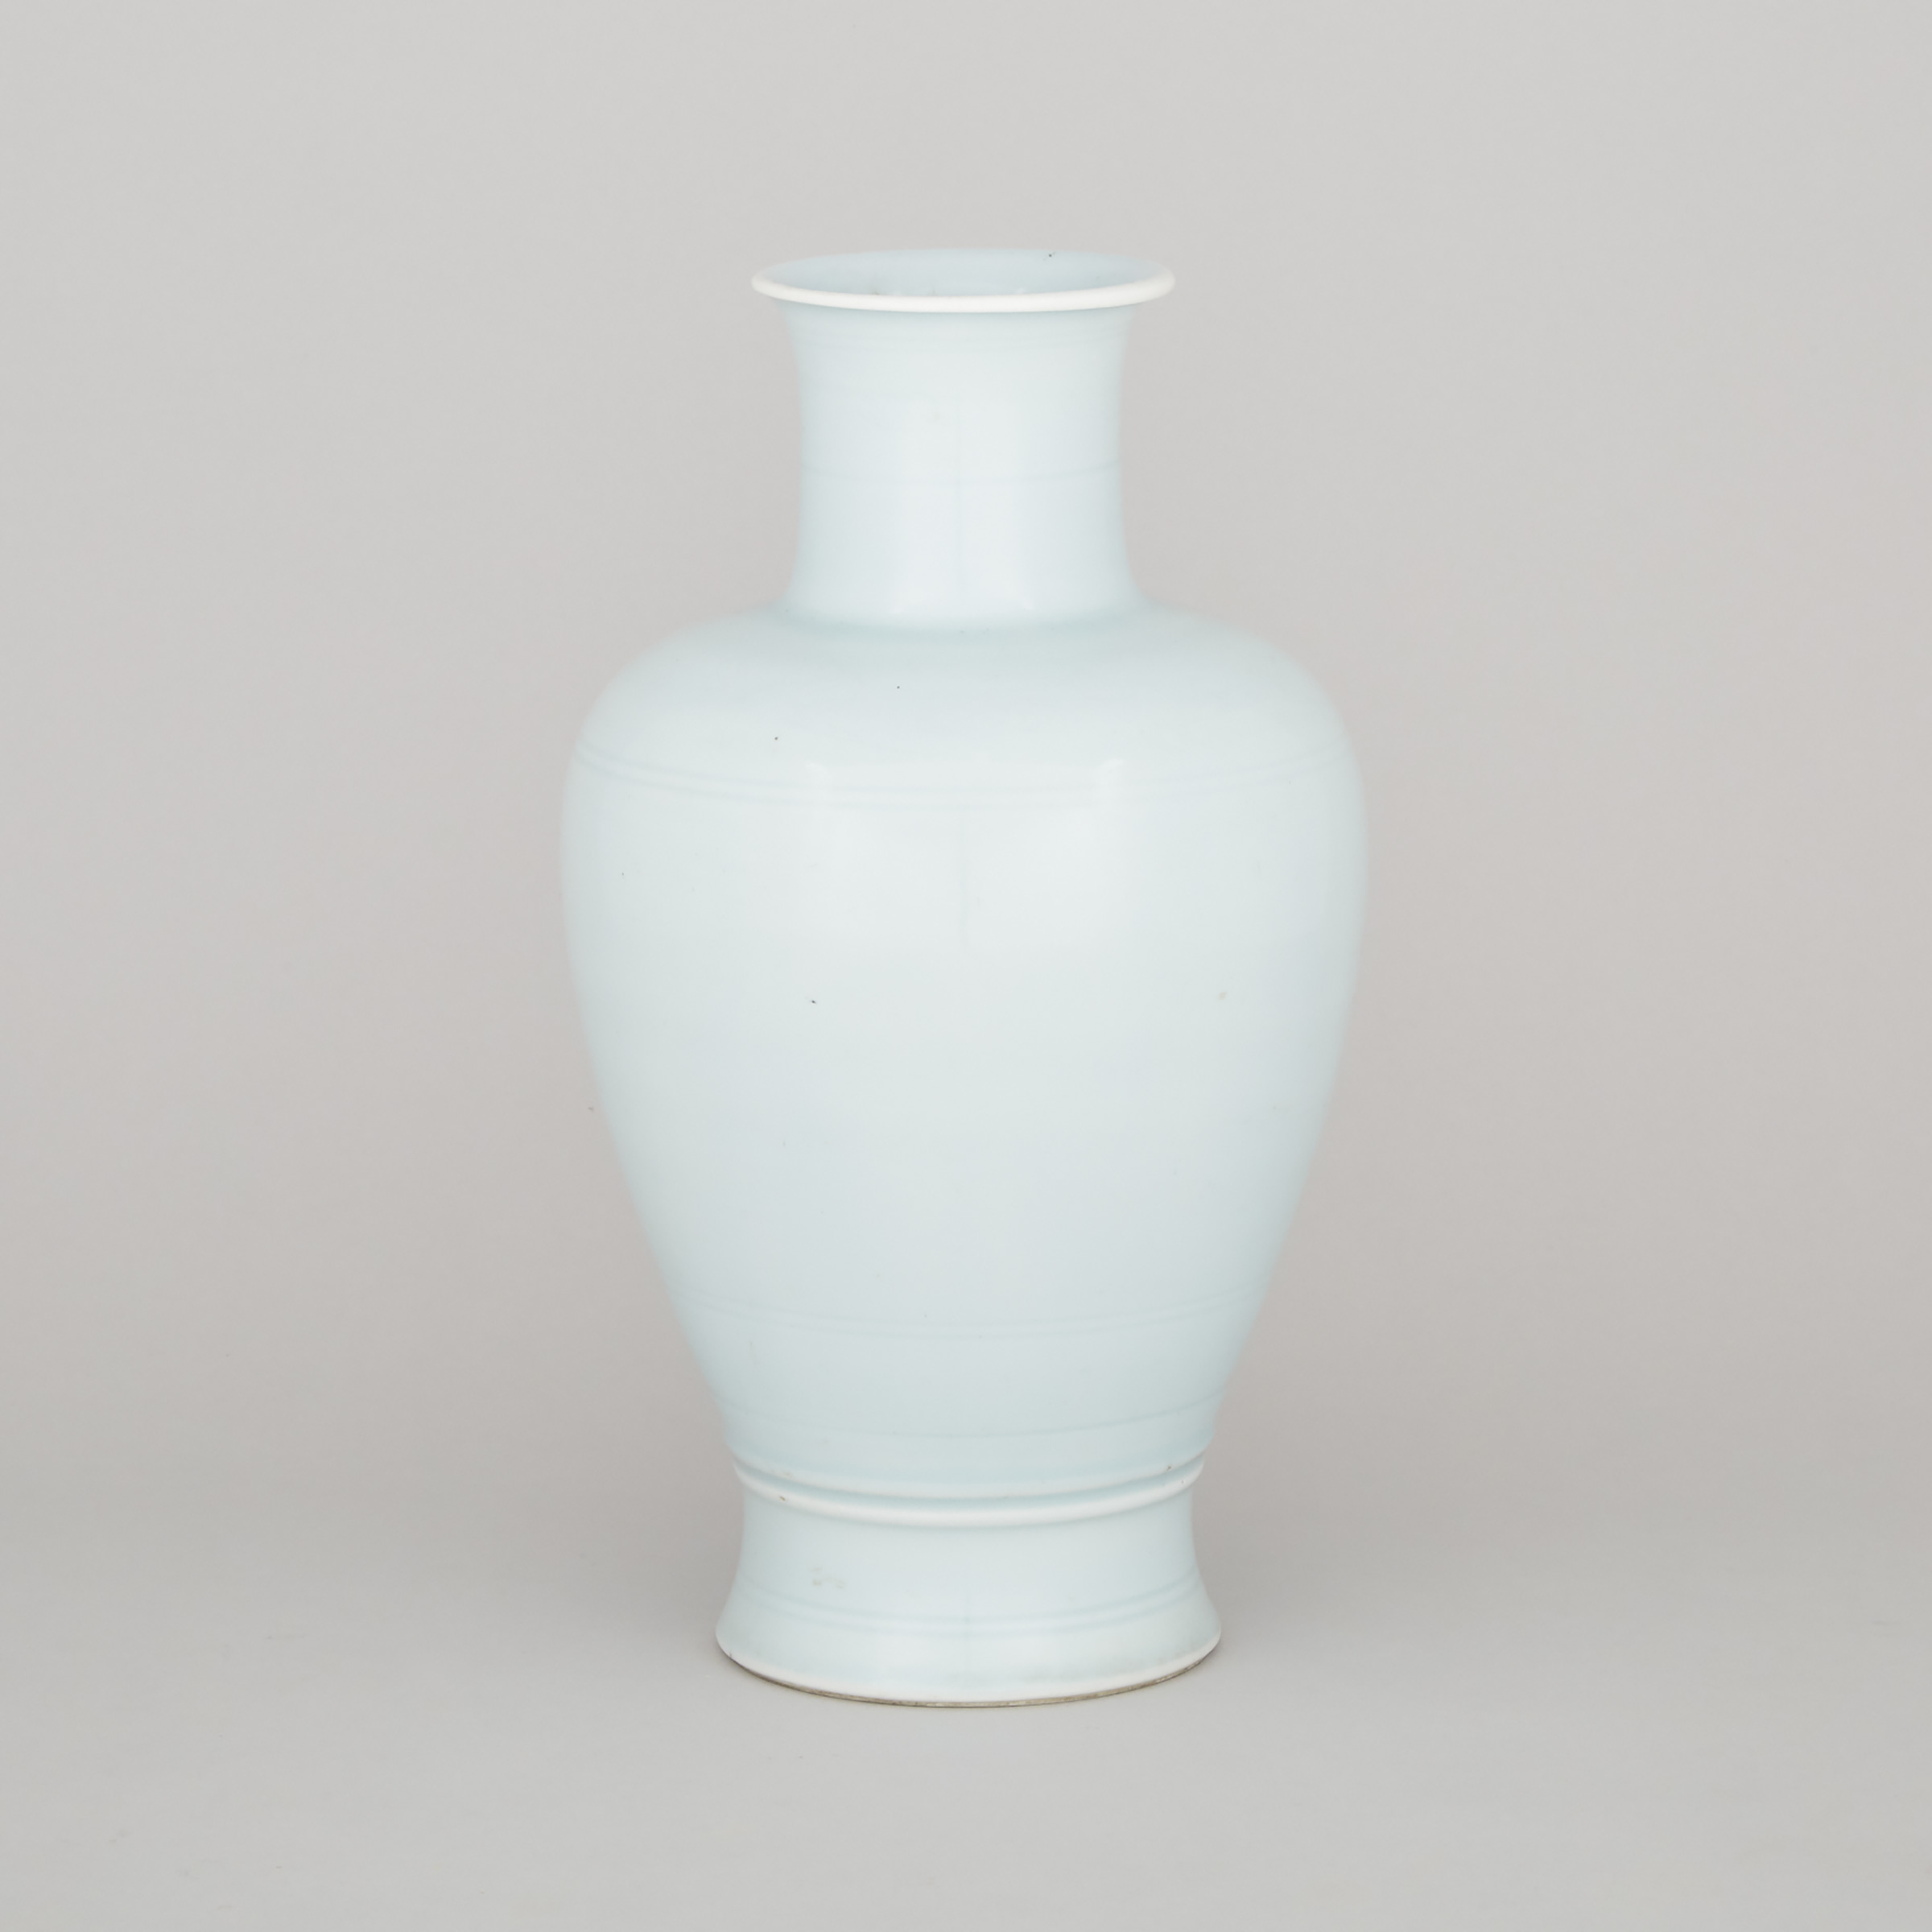 A Clair-de-Lune Glazed Meiping Vase, Late Qing Dynasty